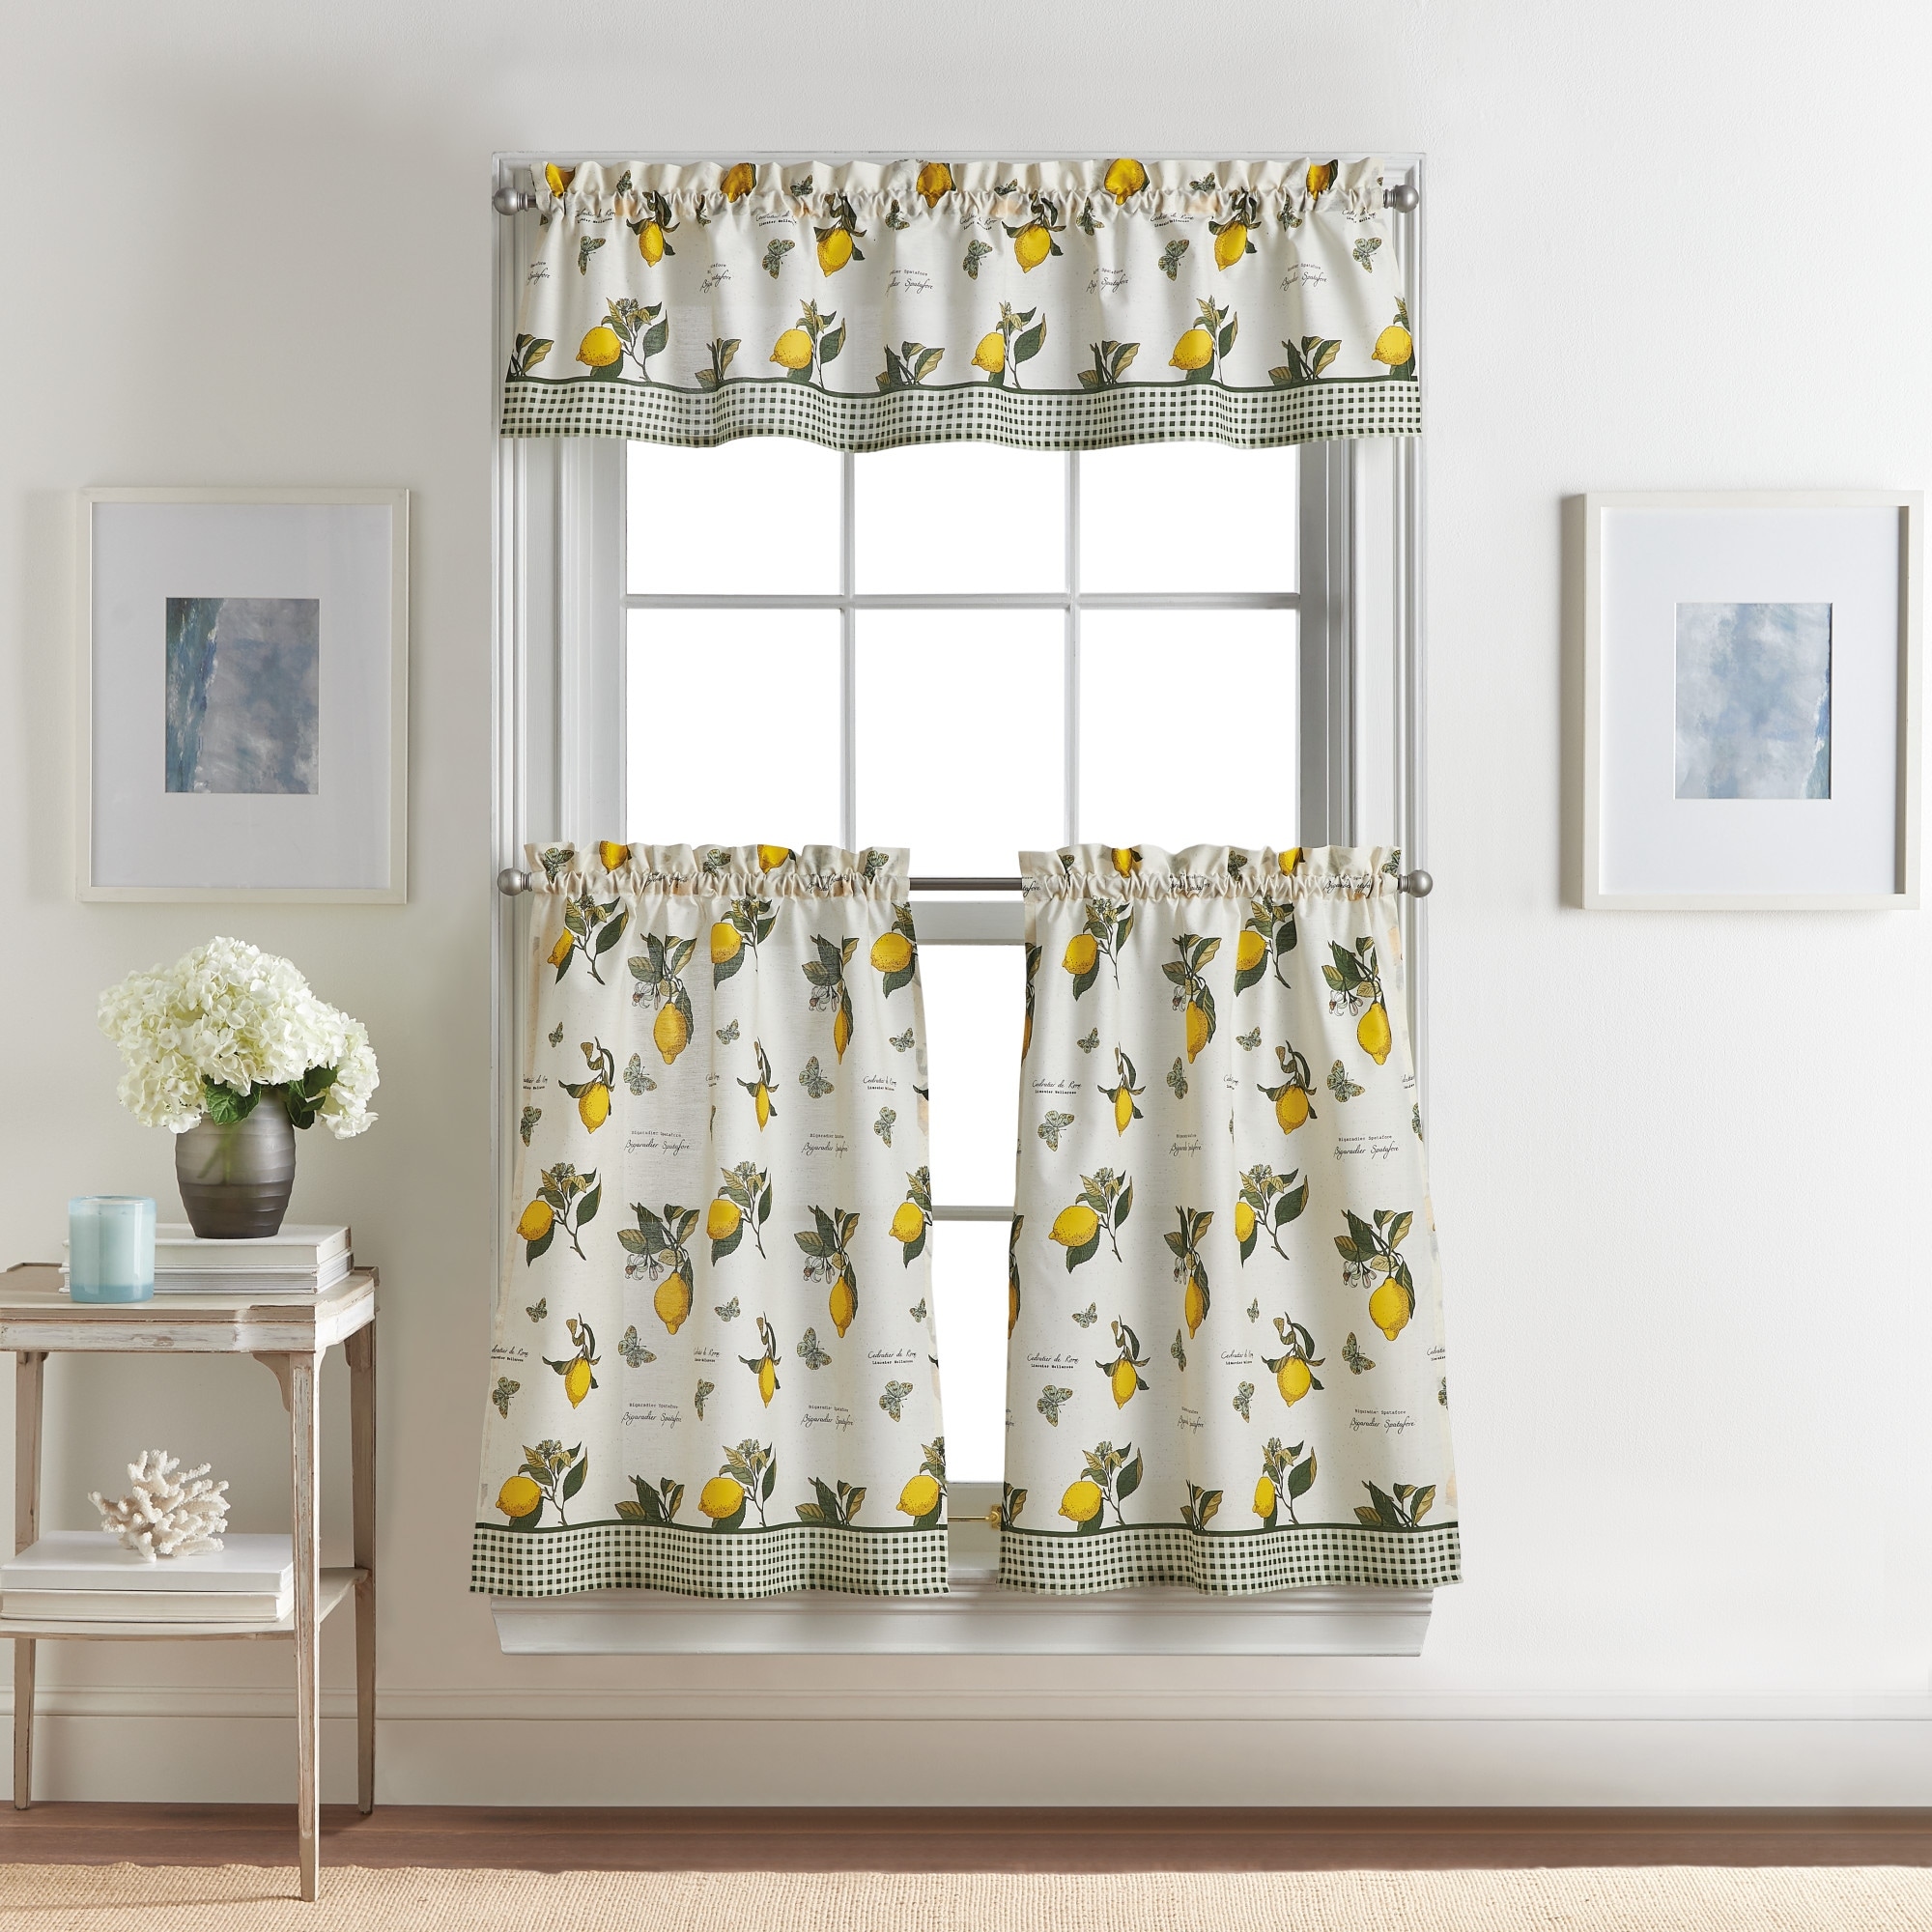 3-Piece Window Kitchen Curtain Set Tier Panels and Valance with Sunflower Print 